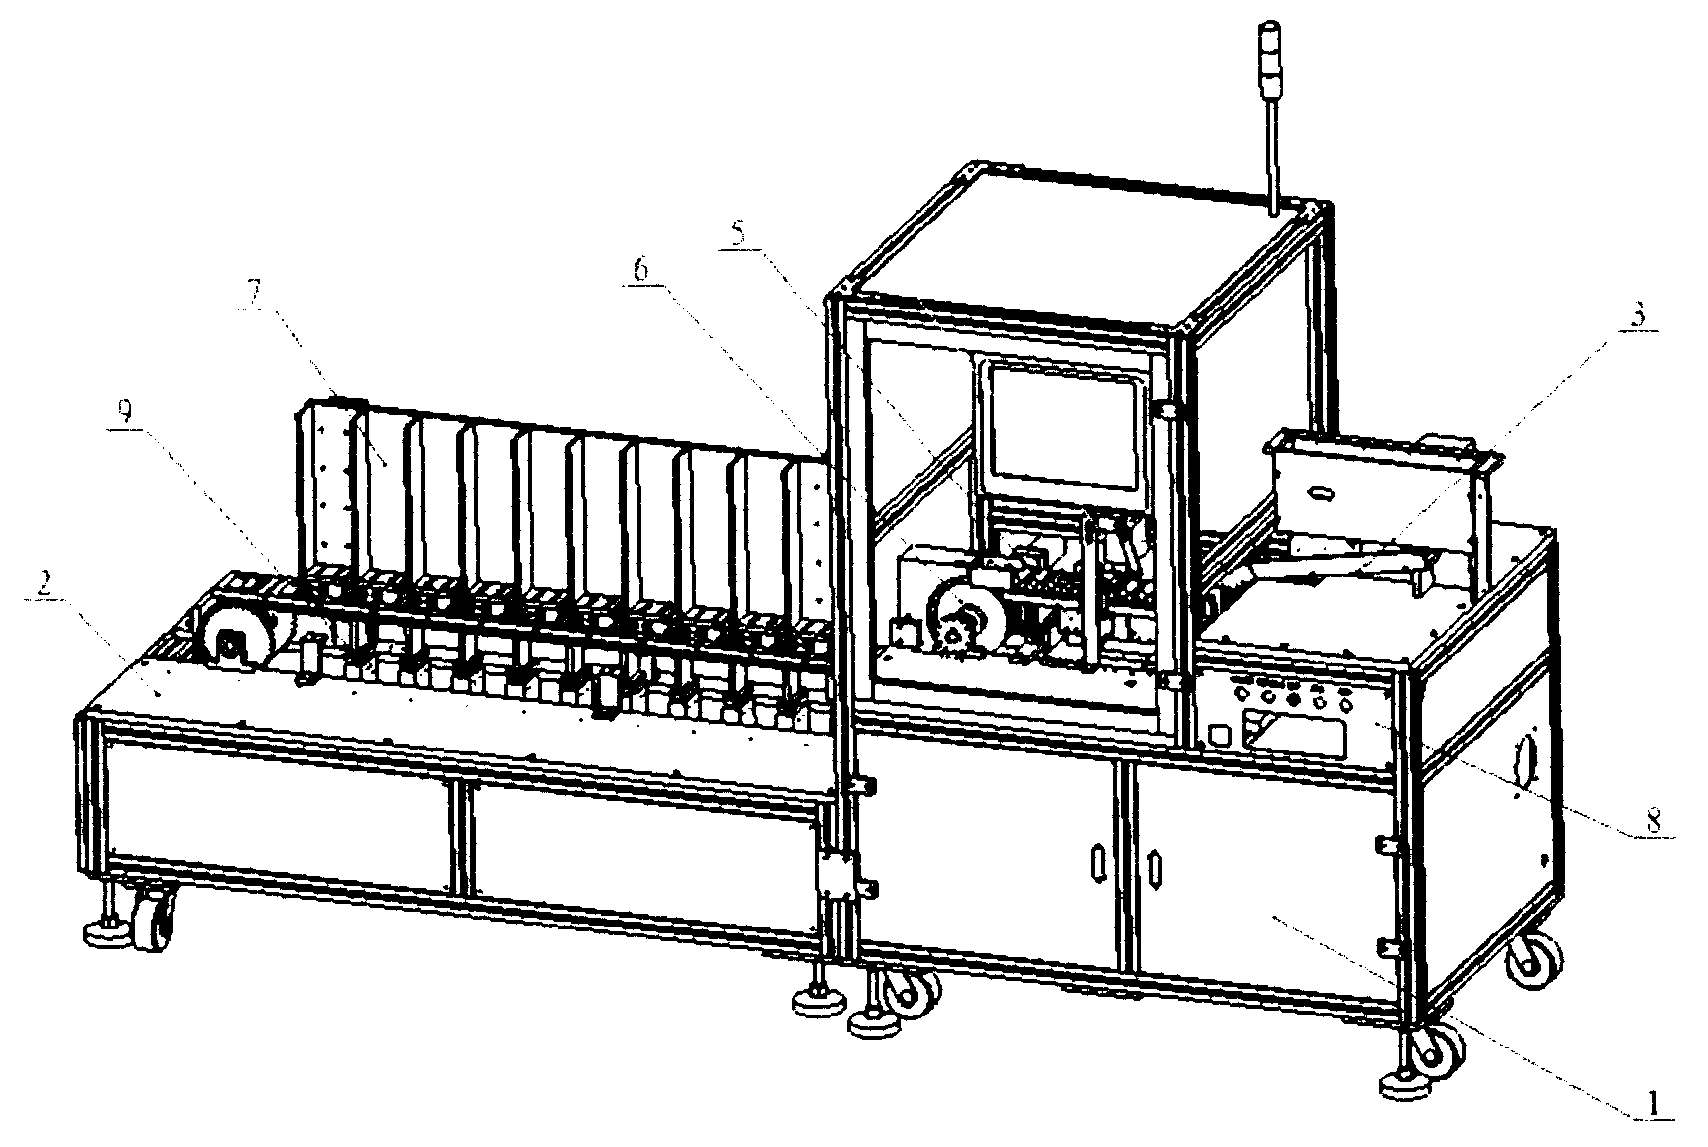 Automatic battery sorting system